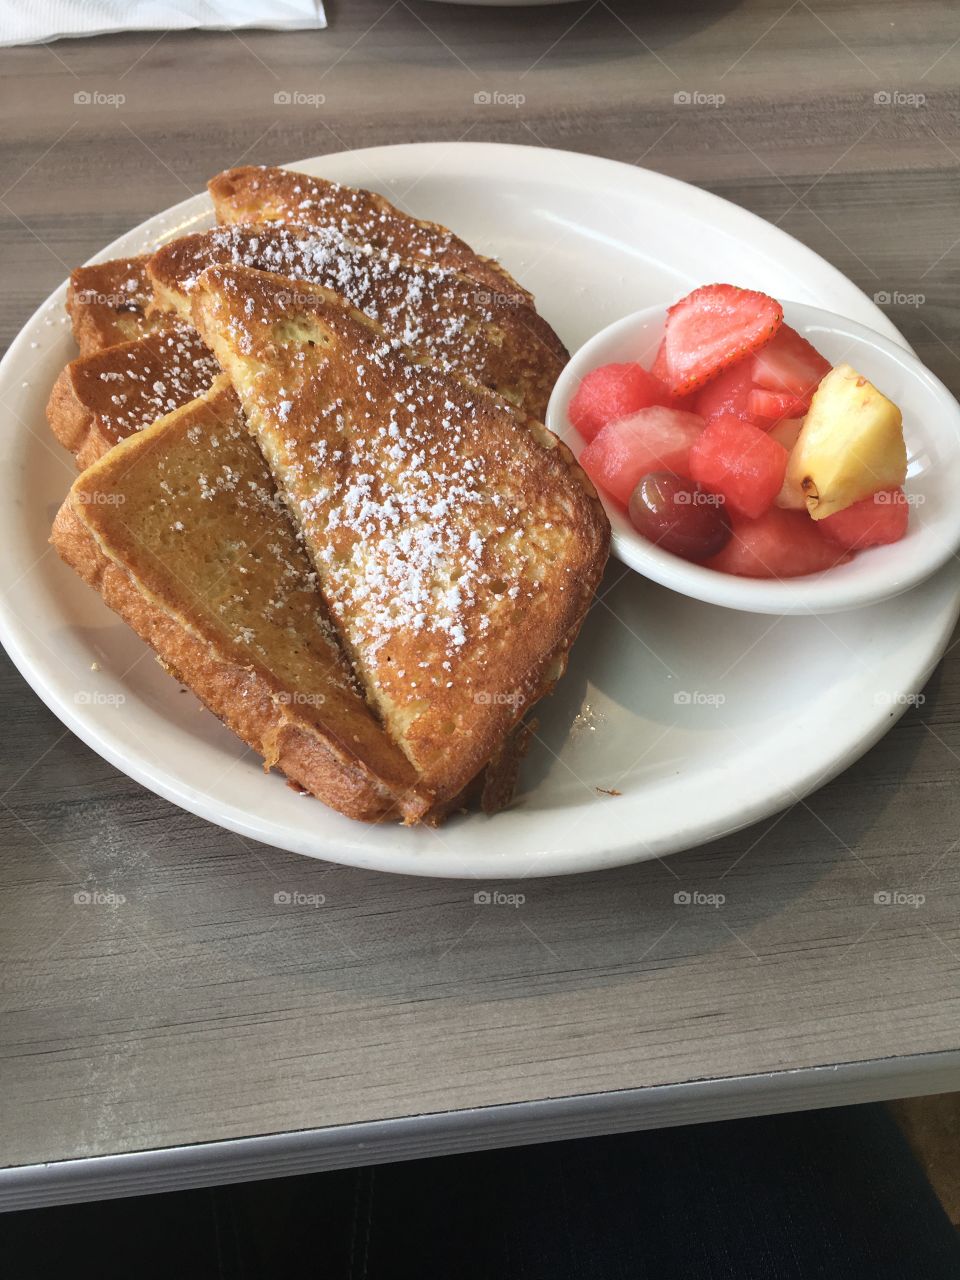 Brunch time French toast 